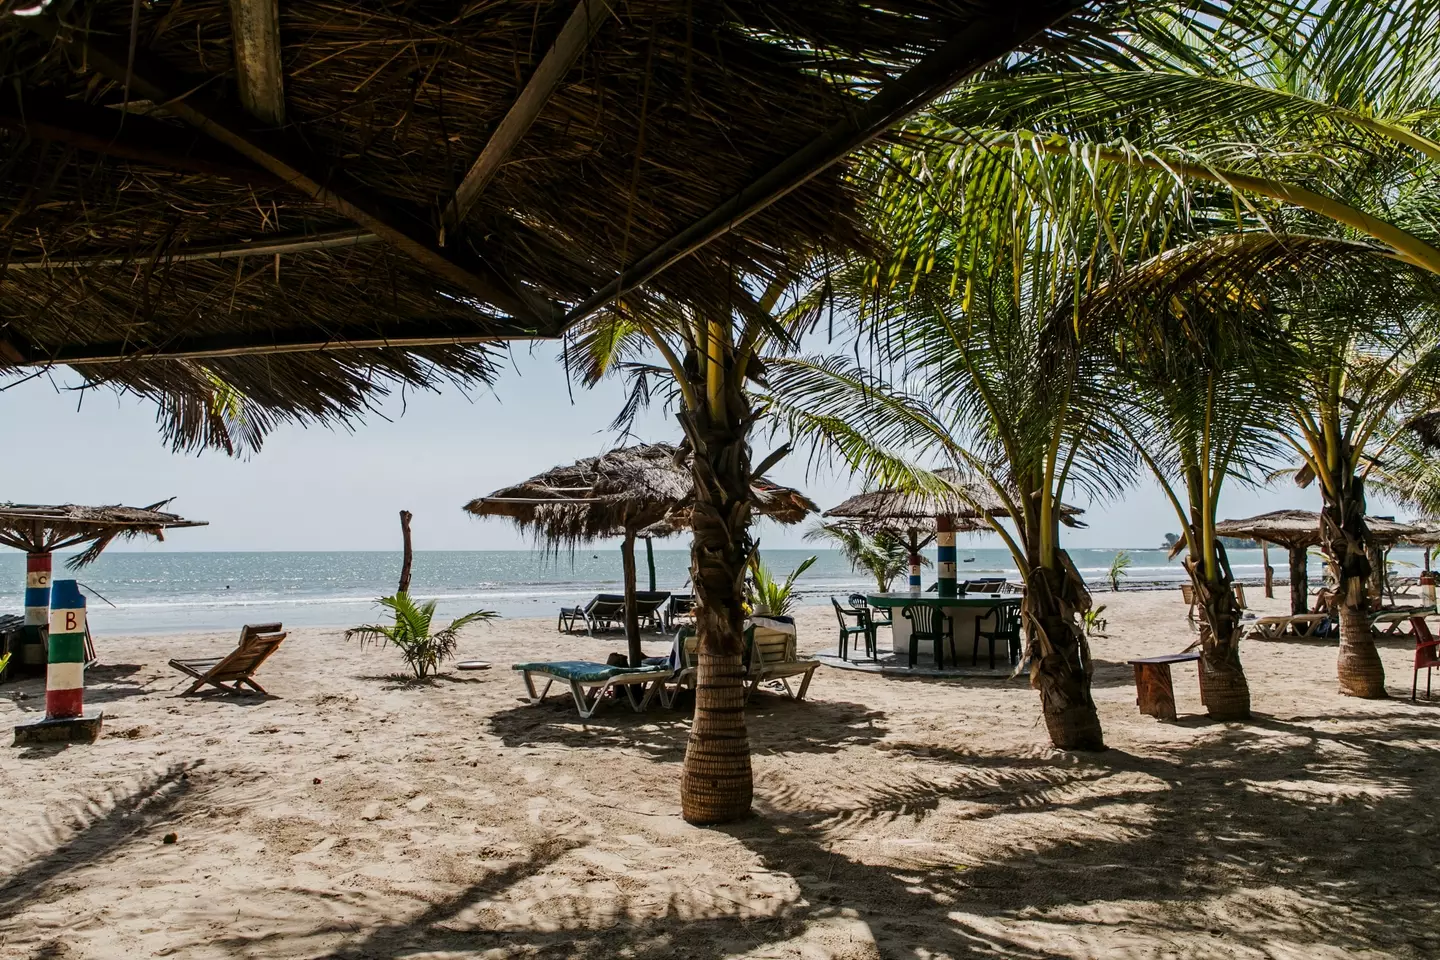 There is something for everyone to enjoy in The Gambia.